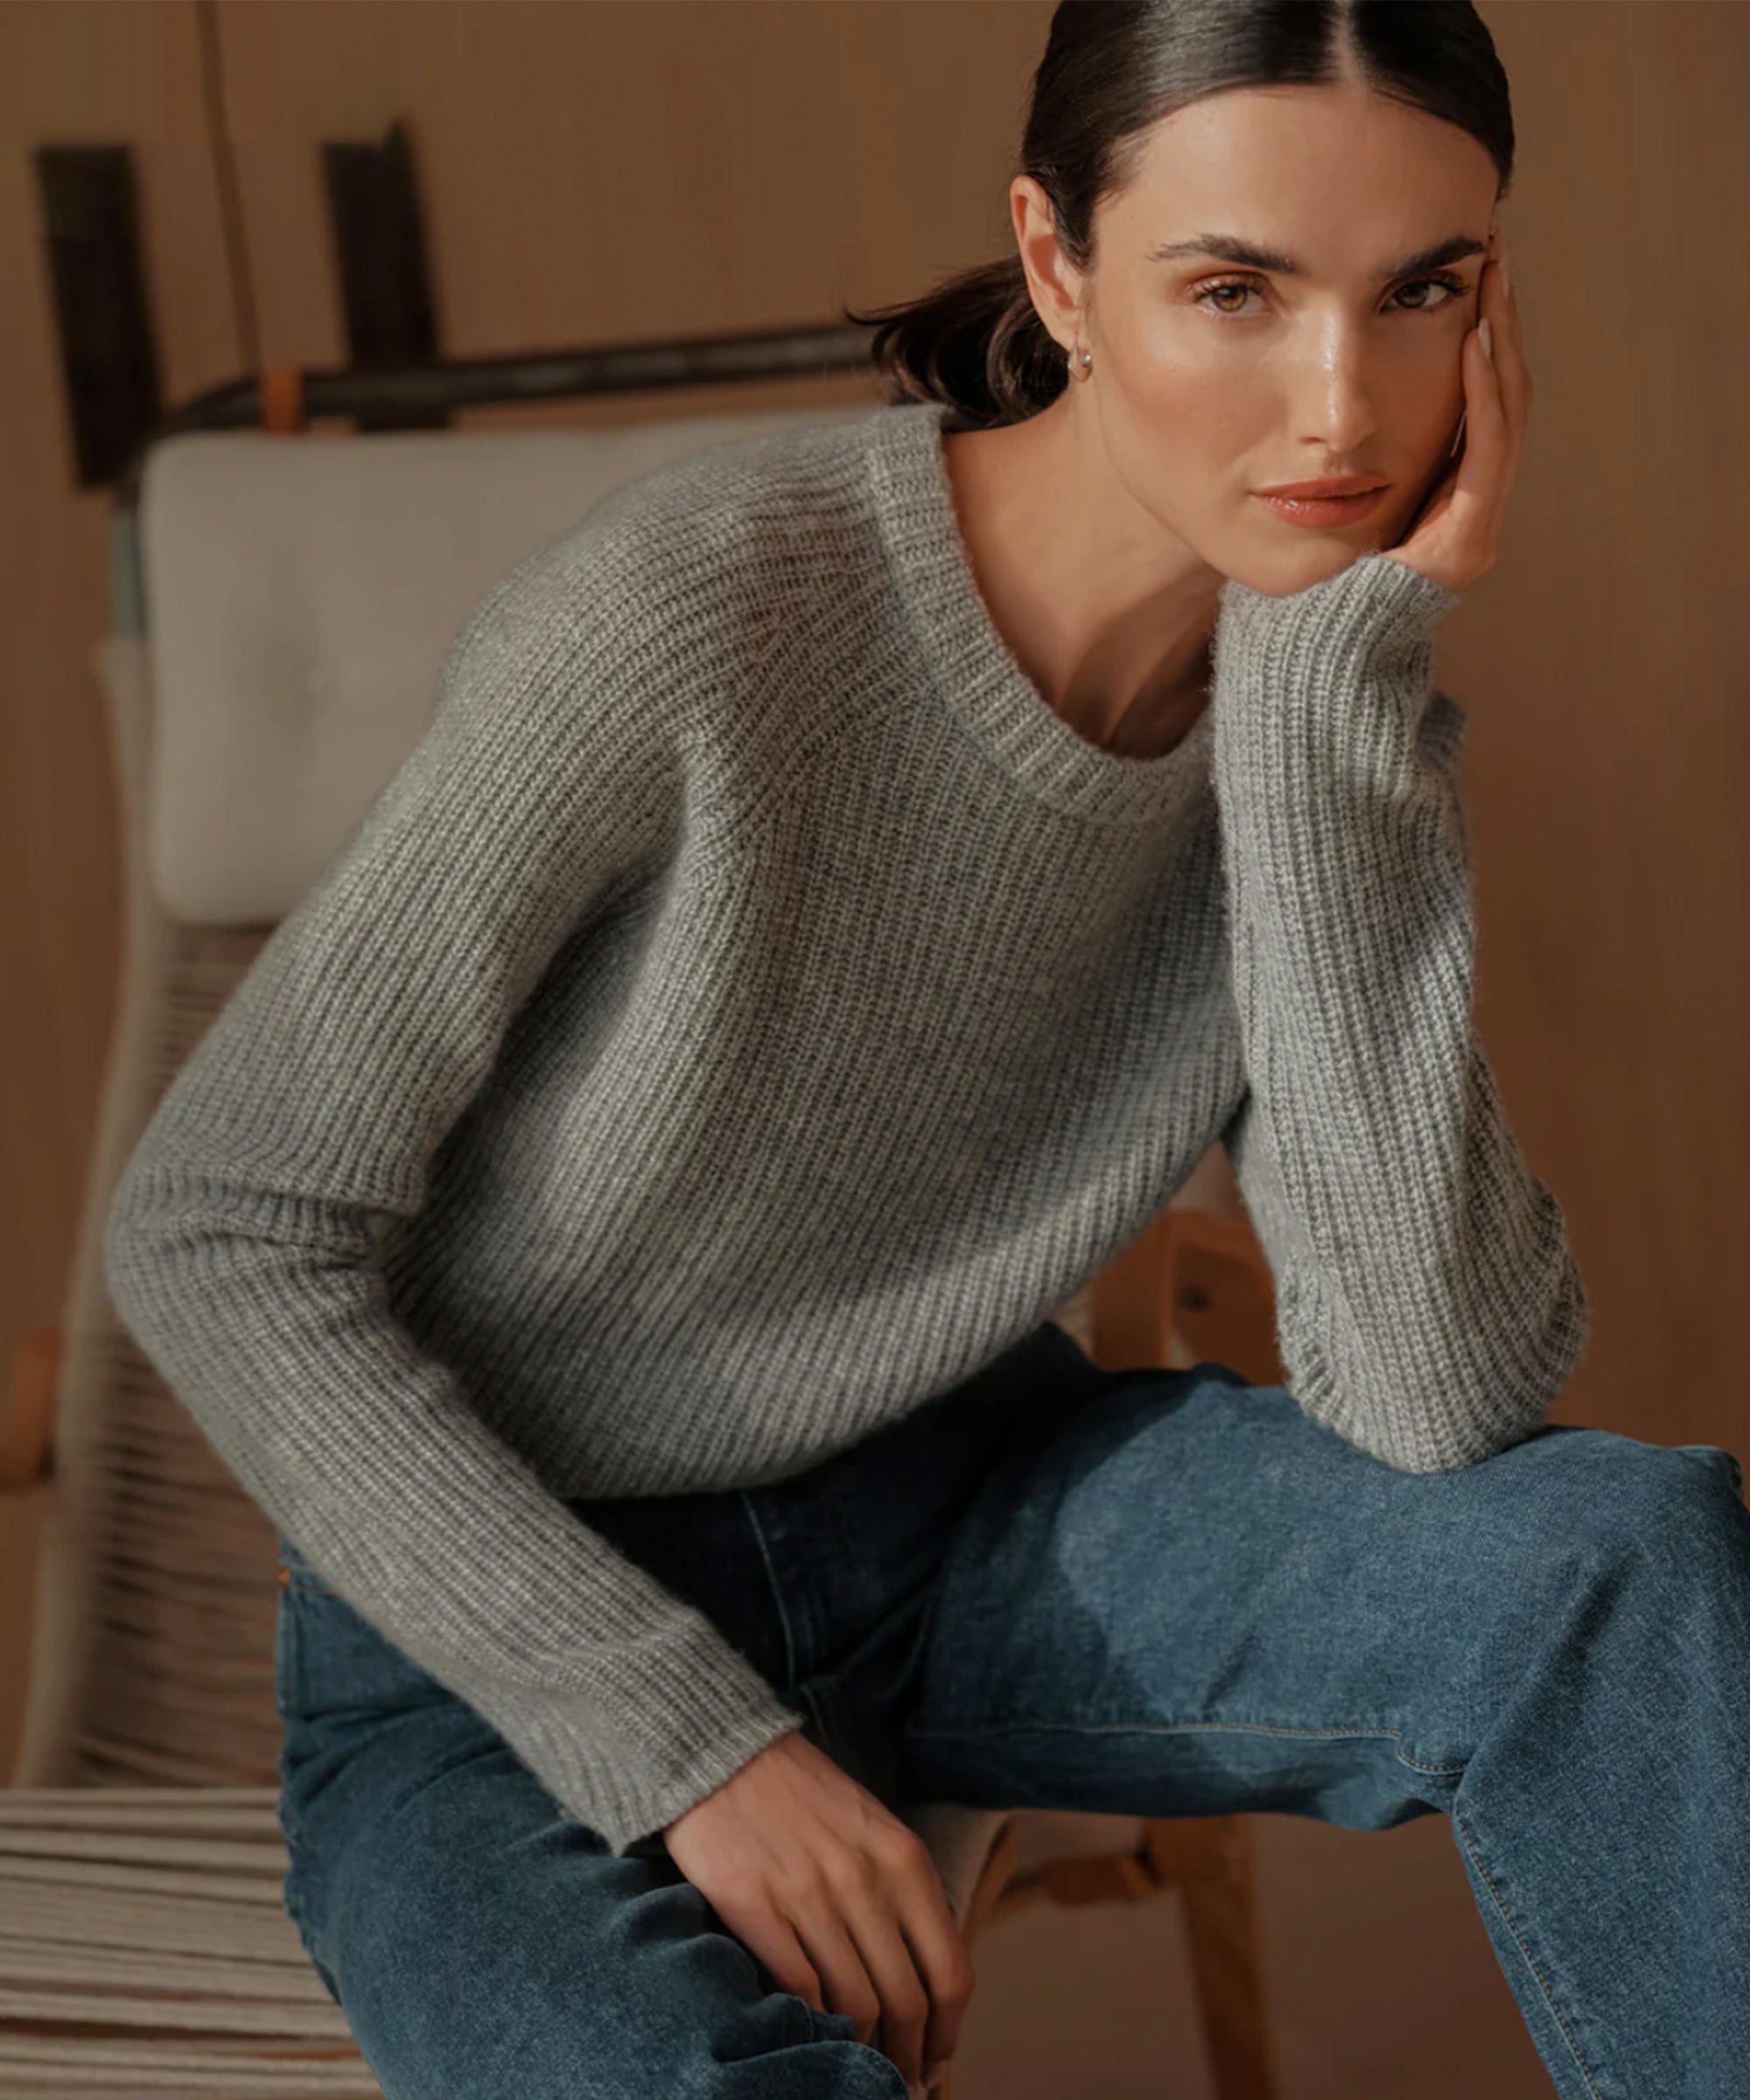 Shoppers Can't Stop Buying These Flattering and Cozy $13